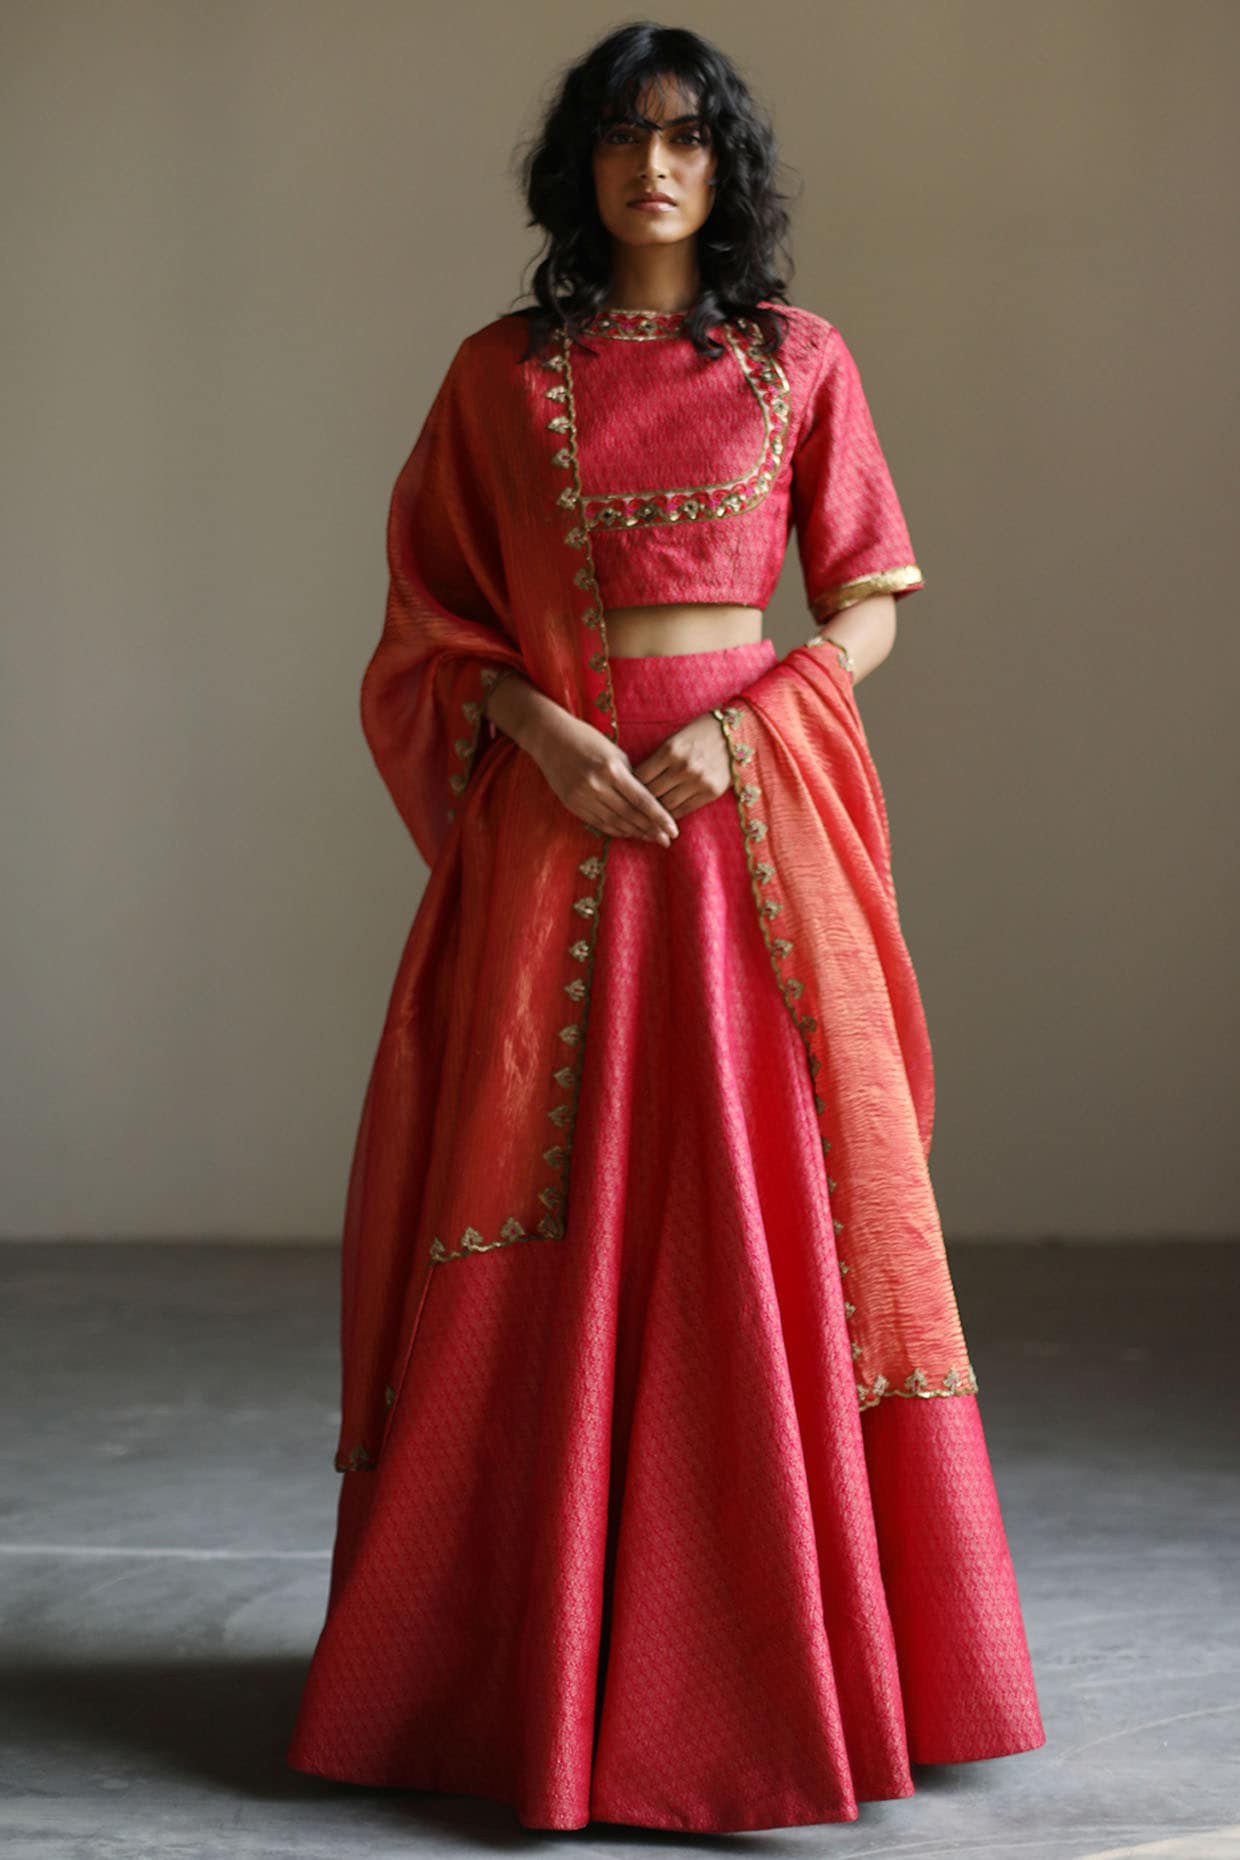 Ditch Red Lehenga Coz Magenta Lehengas Are In For Brides-To-Be! | Indian  wedding dress bridal lehenga, Latest bridal lehenga, Indian bridal outfits